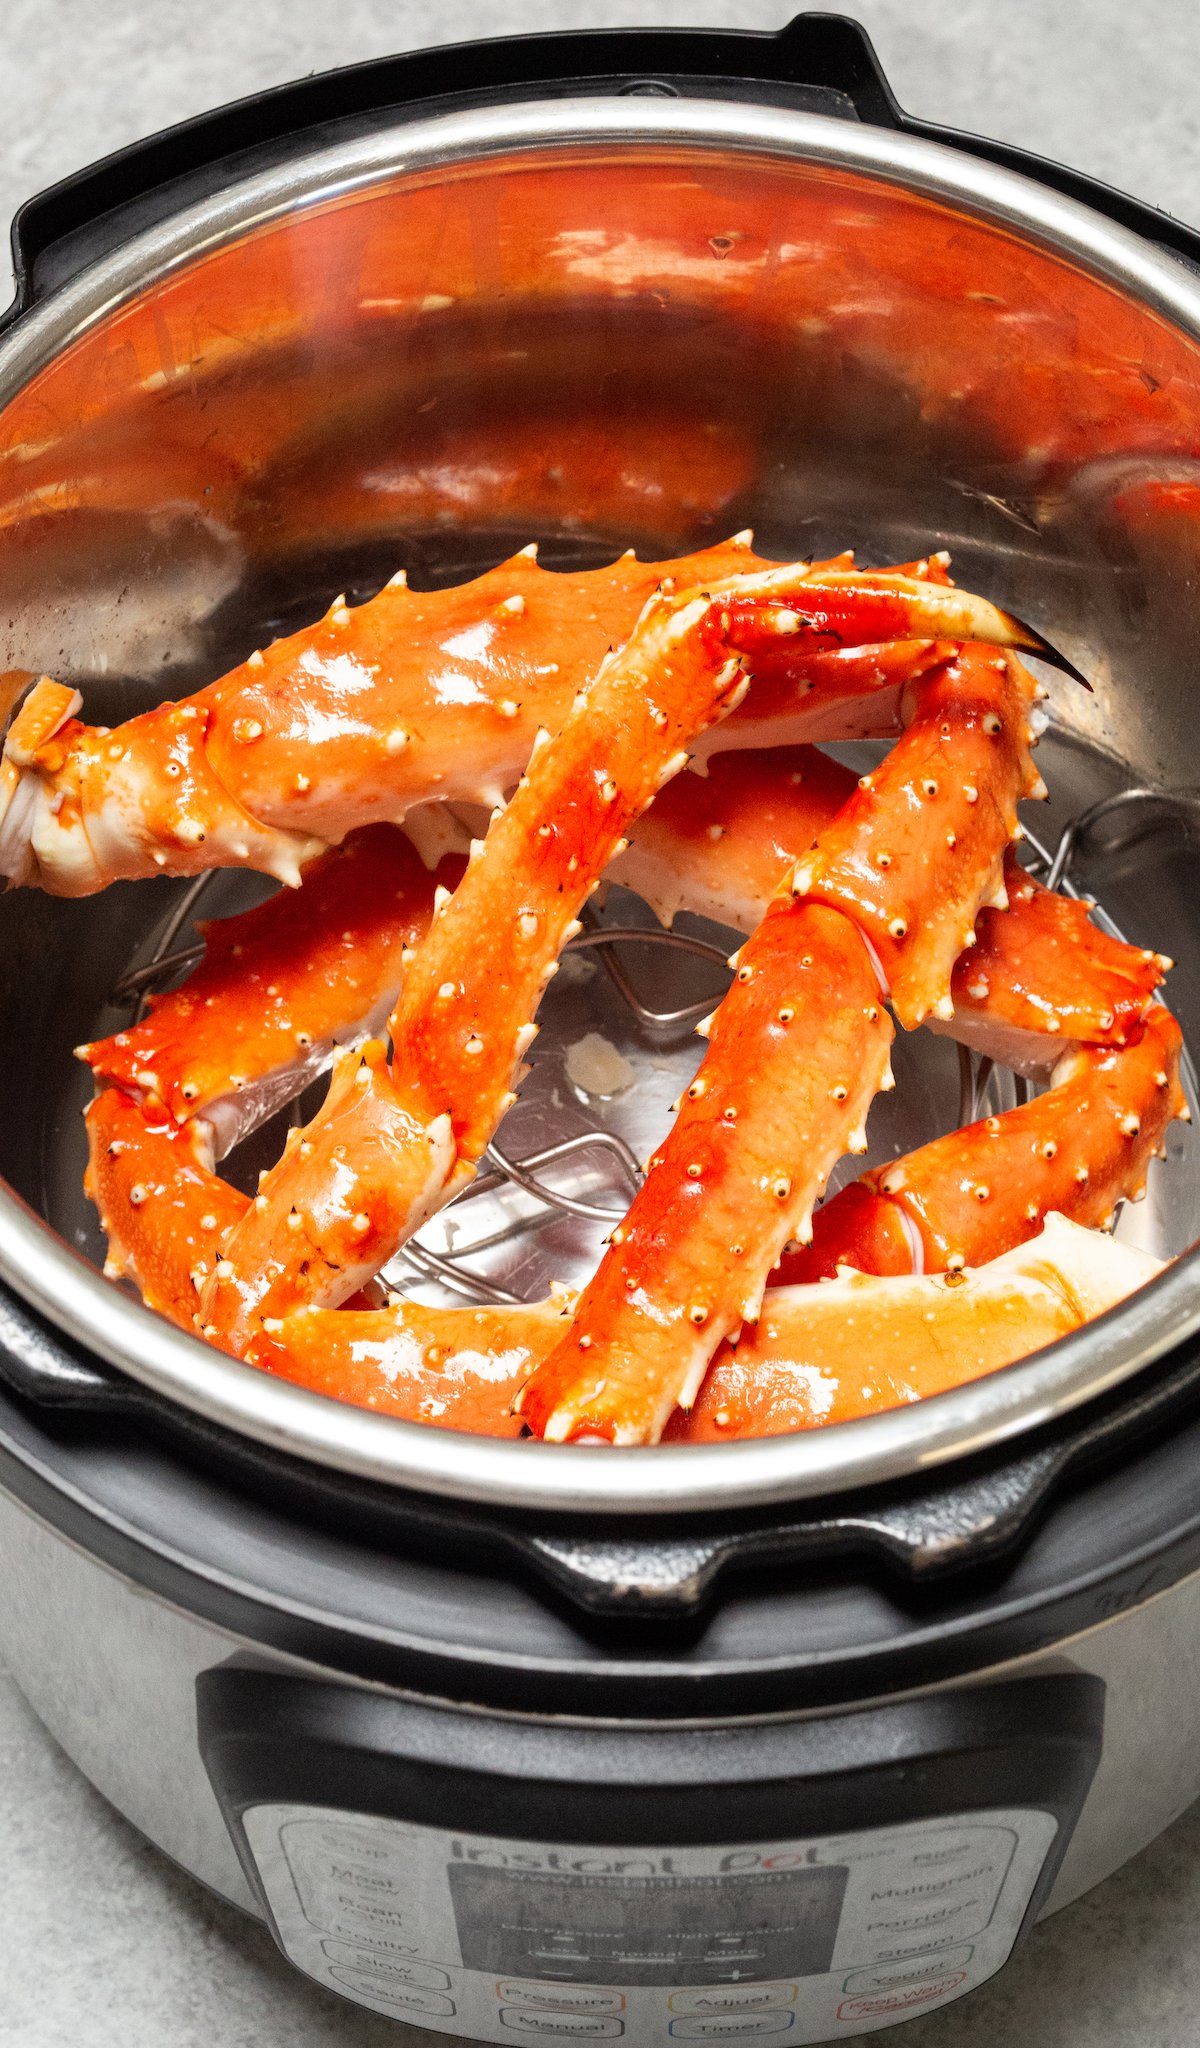 Overhead view of an Instant Pot that is full of King Crab legs